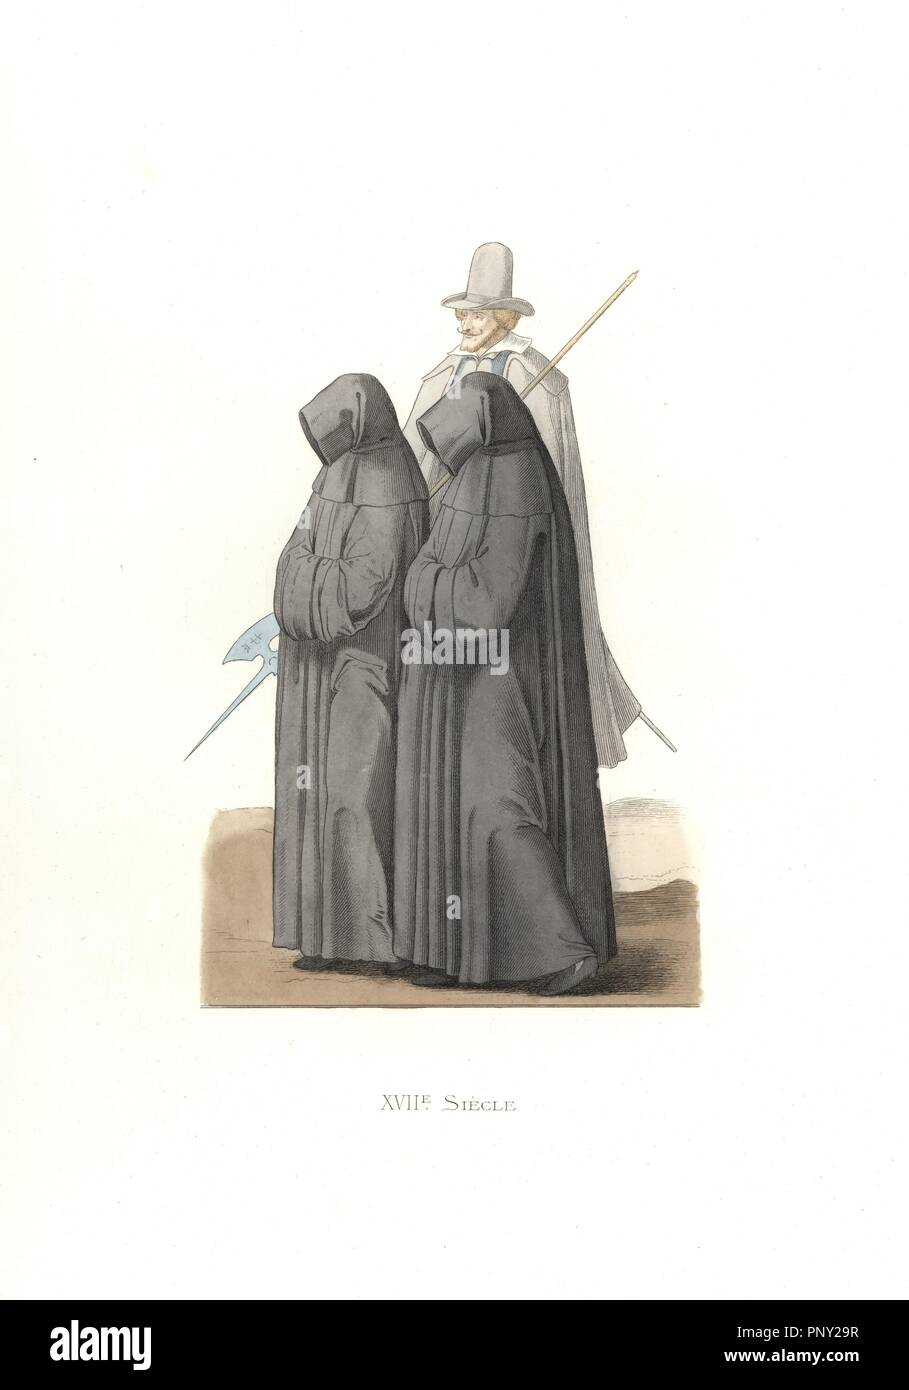 Mourning habits, 17th century, from the funeral of Charles III, Duke of Lorraine. From a painting by Fred. Brentel. Handcolored illustration by E. Lechevallier-Chevignard, lithographed by A. Didier, L. Flameng, F. Laguillermie, from Georges Duplessis's 'Costumes historiques des XVIe, XVIIe et XVIIIe siecles' (Historical costumes of the 16th, 17th and 18th centuries), Paris 1867. The book was a continuation of the series on the costumes of the 12th to 15th centuries published by Camille Bonnard and Paul Mercuri from 1830. Georges Duplessis (1834-1899) was curator of the Prints department at the Stock Photo